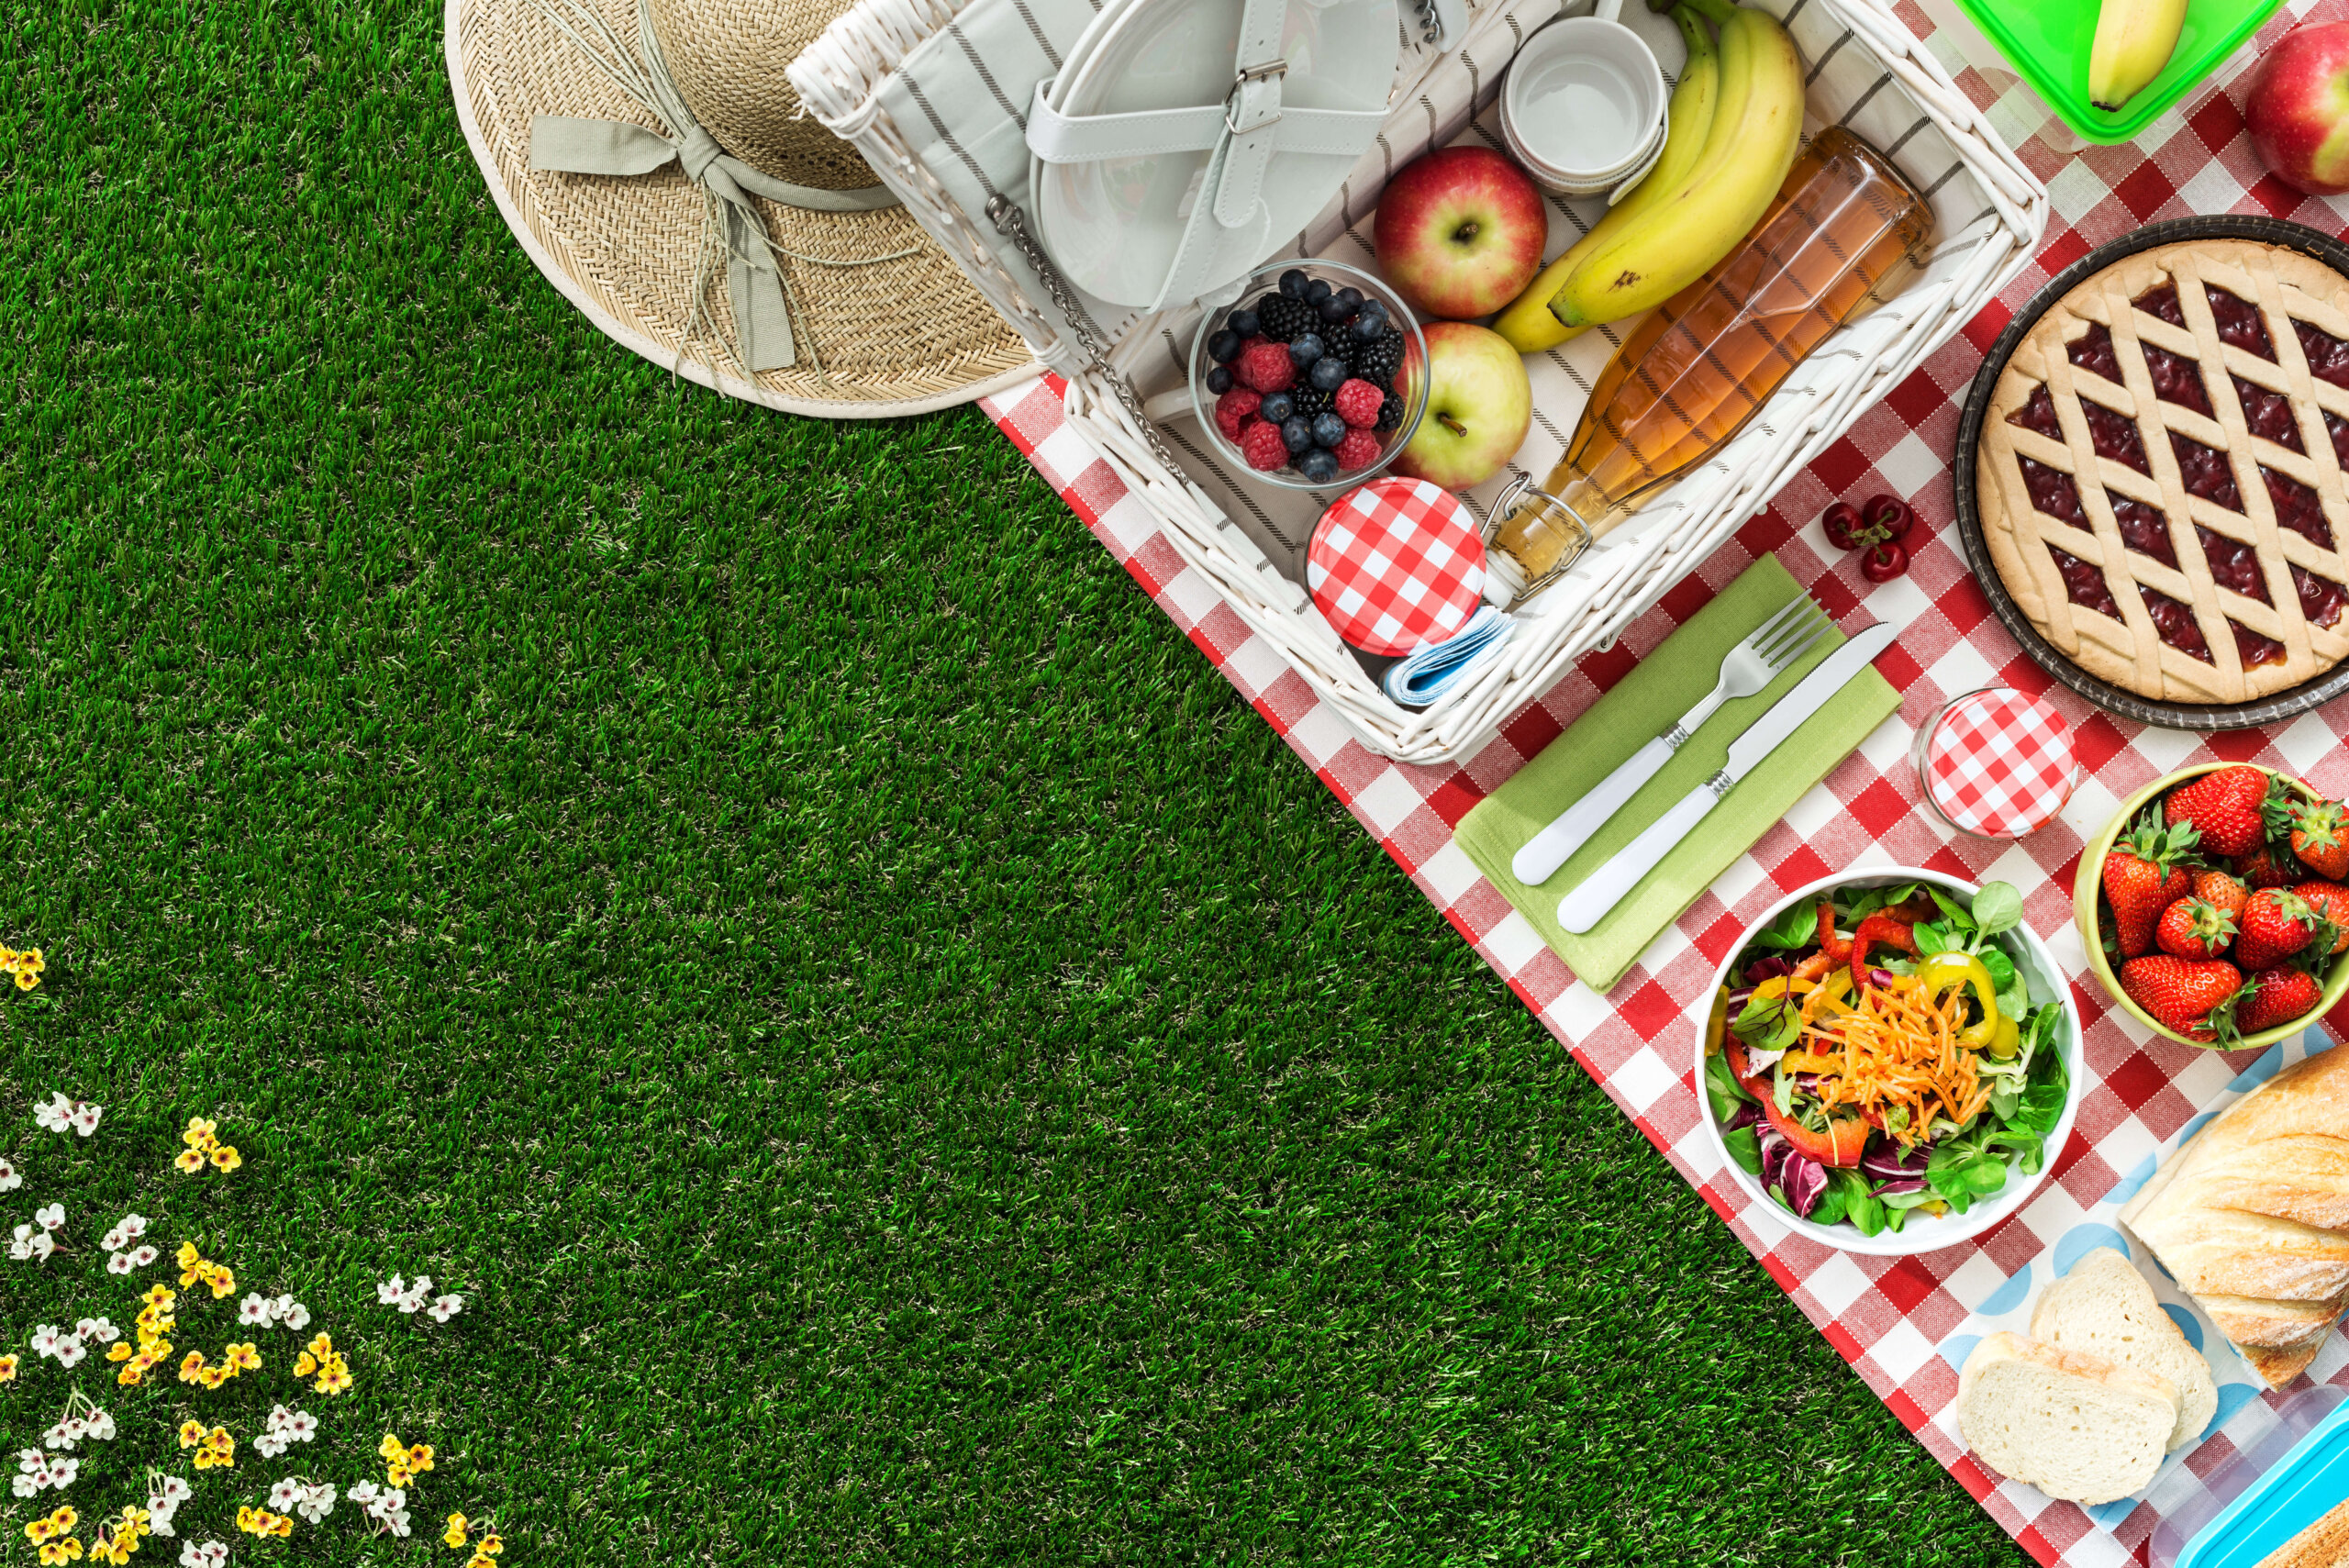 Your Most Memorable Picnic Day Ever